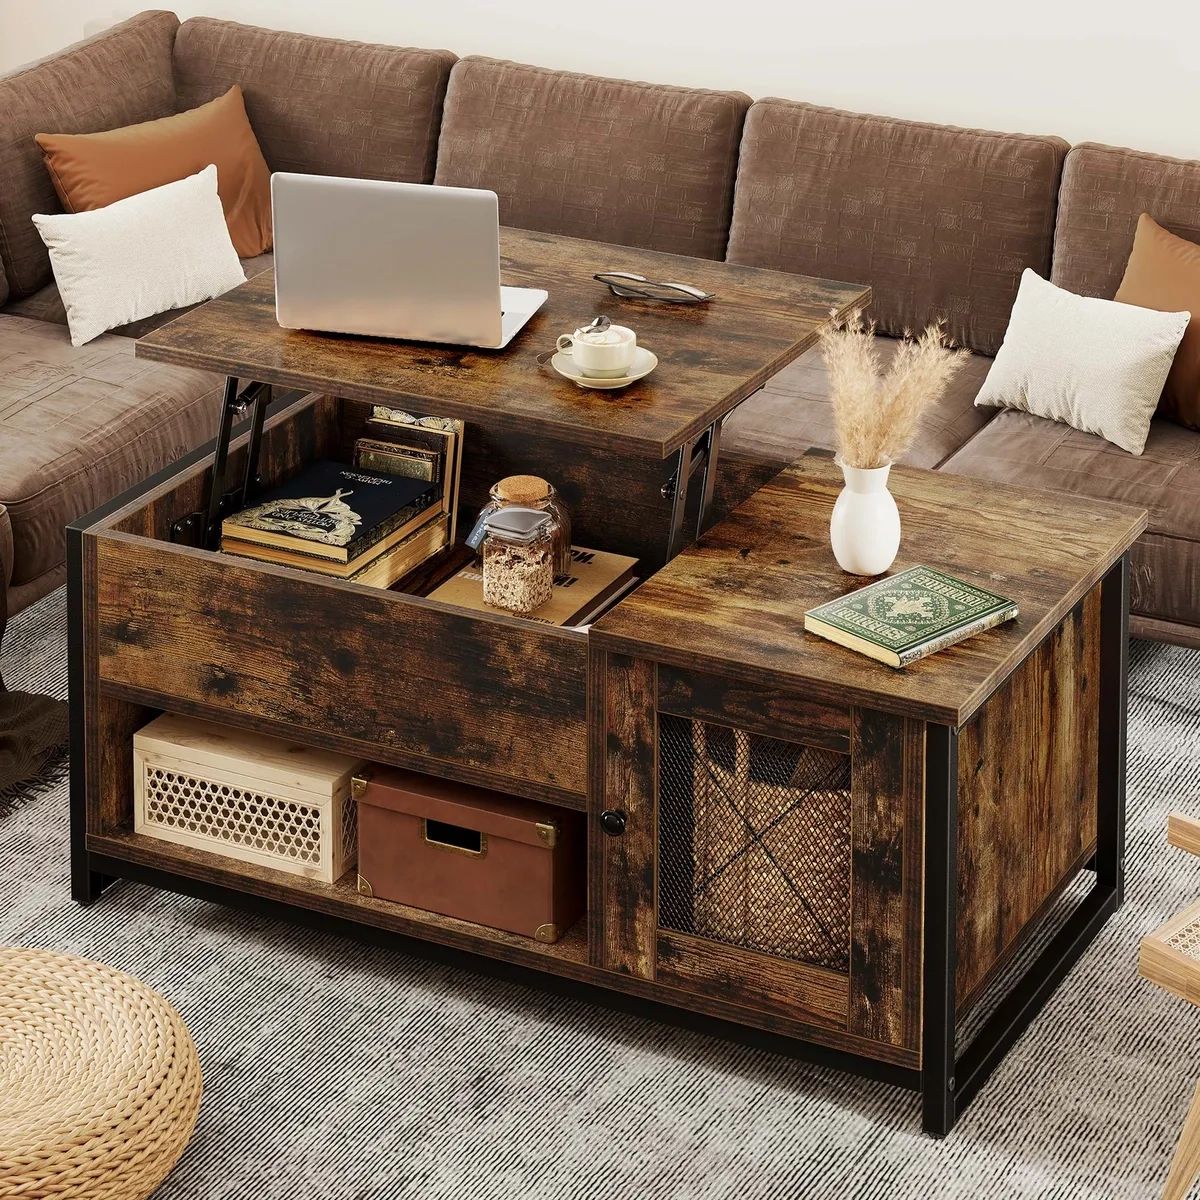 Farmhouse Lift Top Coffee Table With Hidden Compartment And Storage Shelf  Brown | Ebay For Lift Top Coffee Tables With Shelves (View 7 of 15)